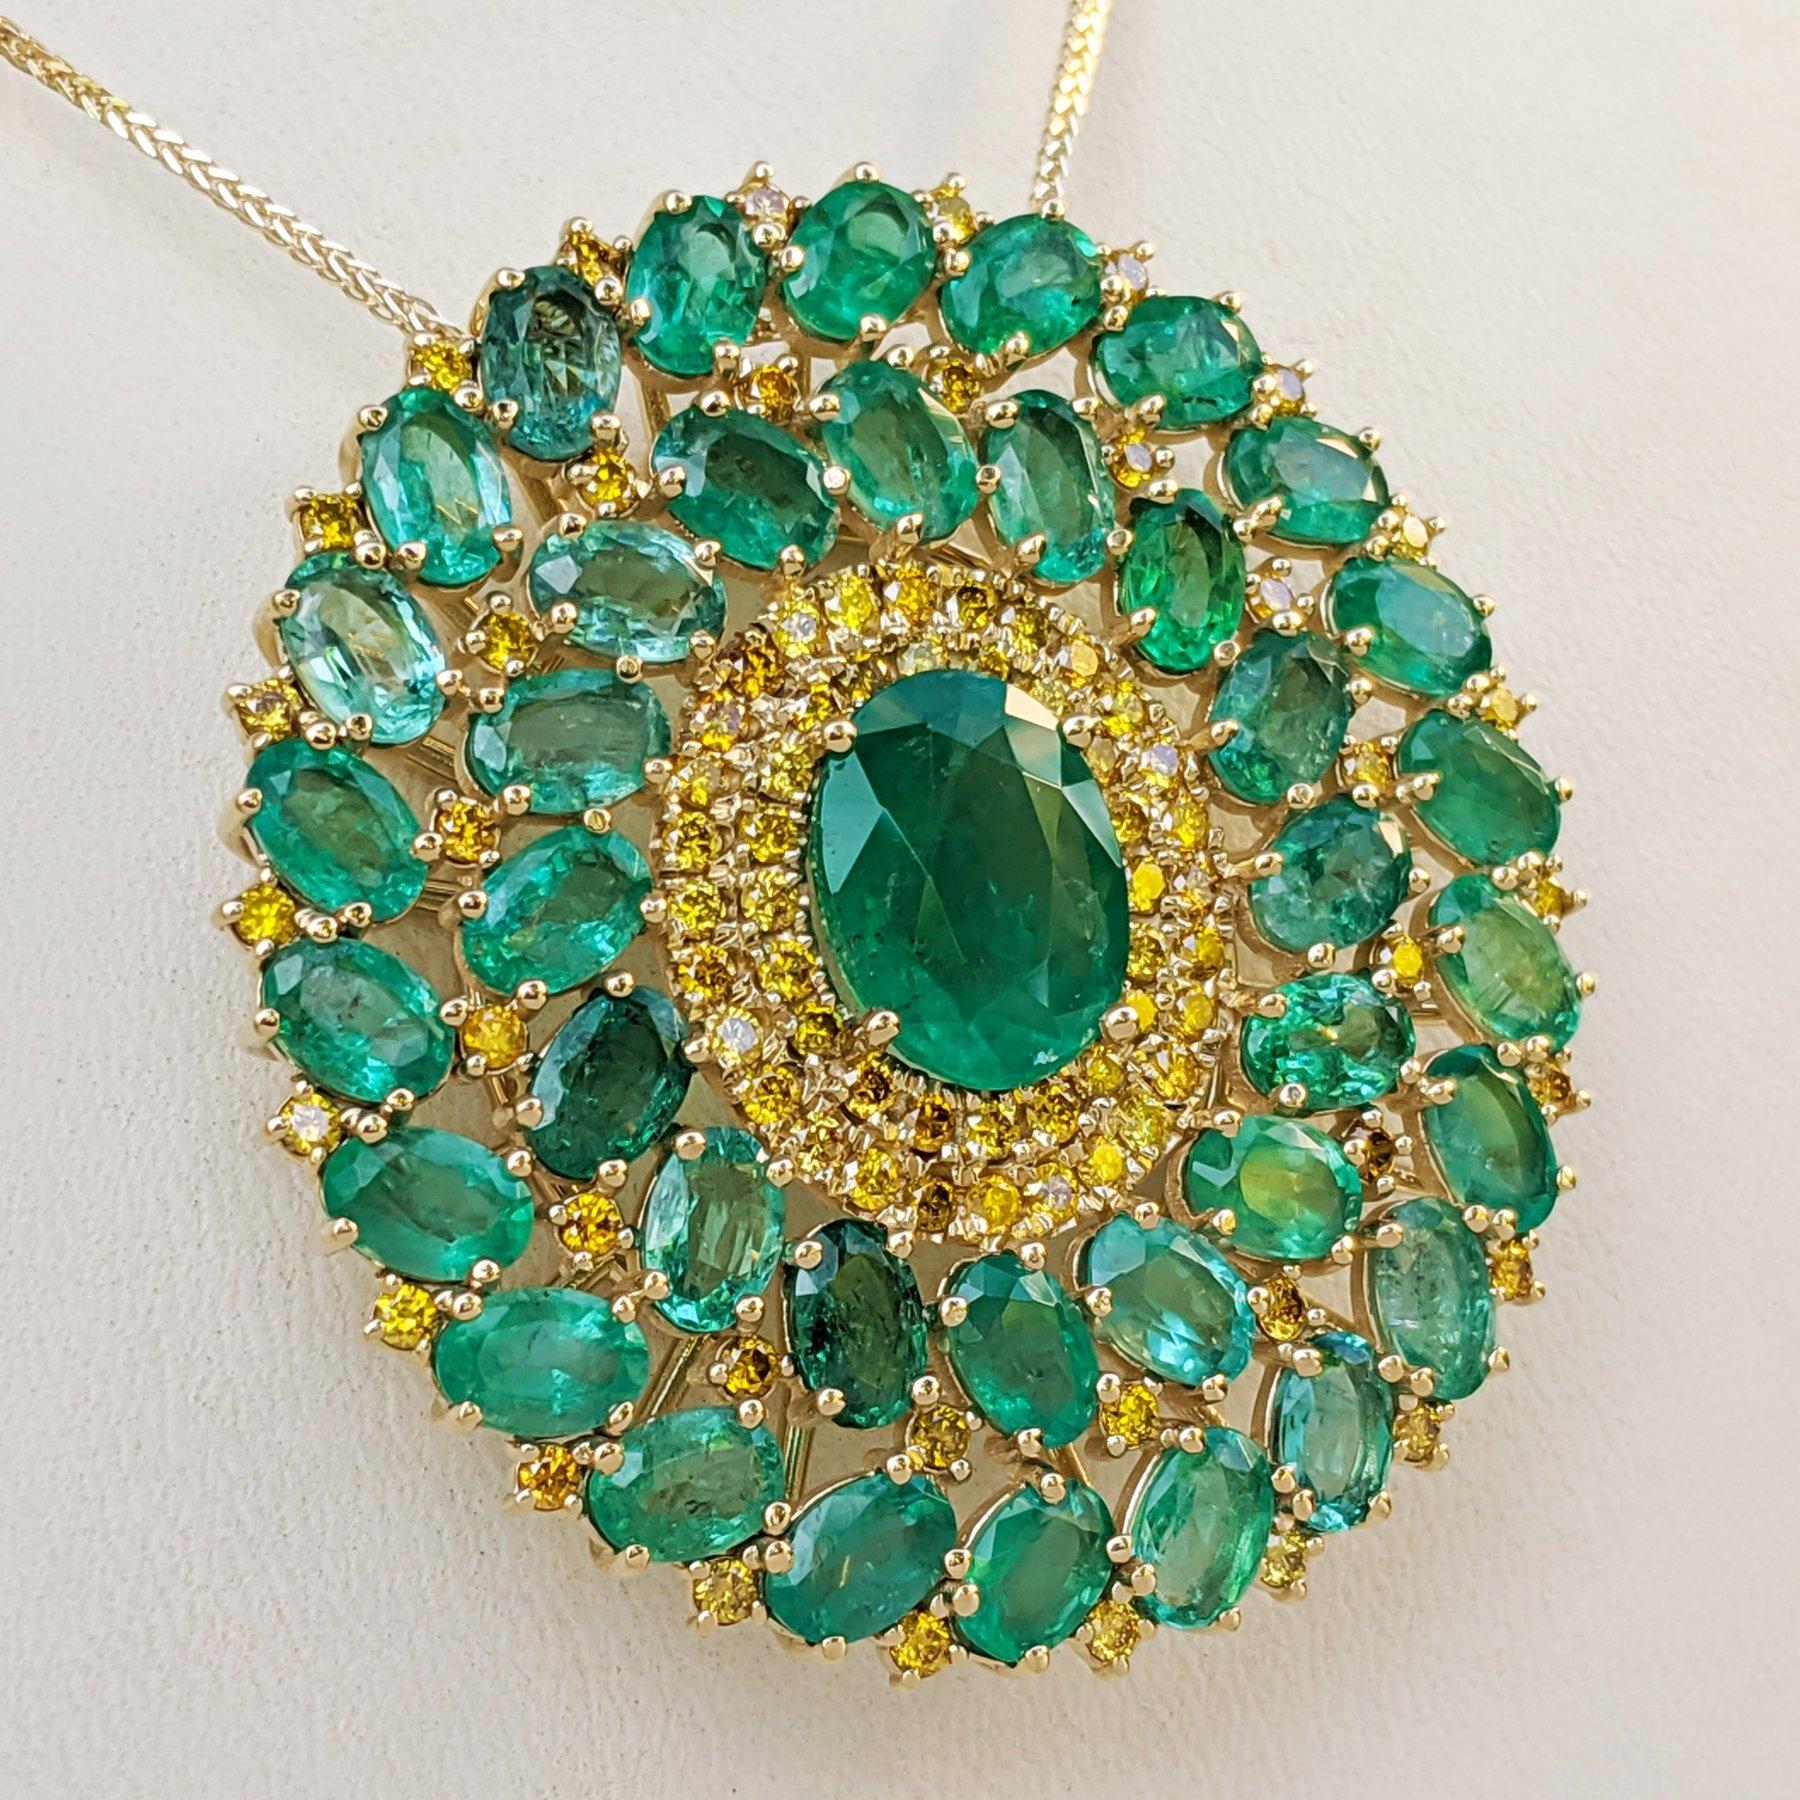 NO RESERVE 20.12Ct Emeralds & 2.05Ct Diamonds 14 kt. Gold Pendant Necklace In New Condition For Sale In Ramat Gan, IL